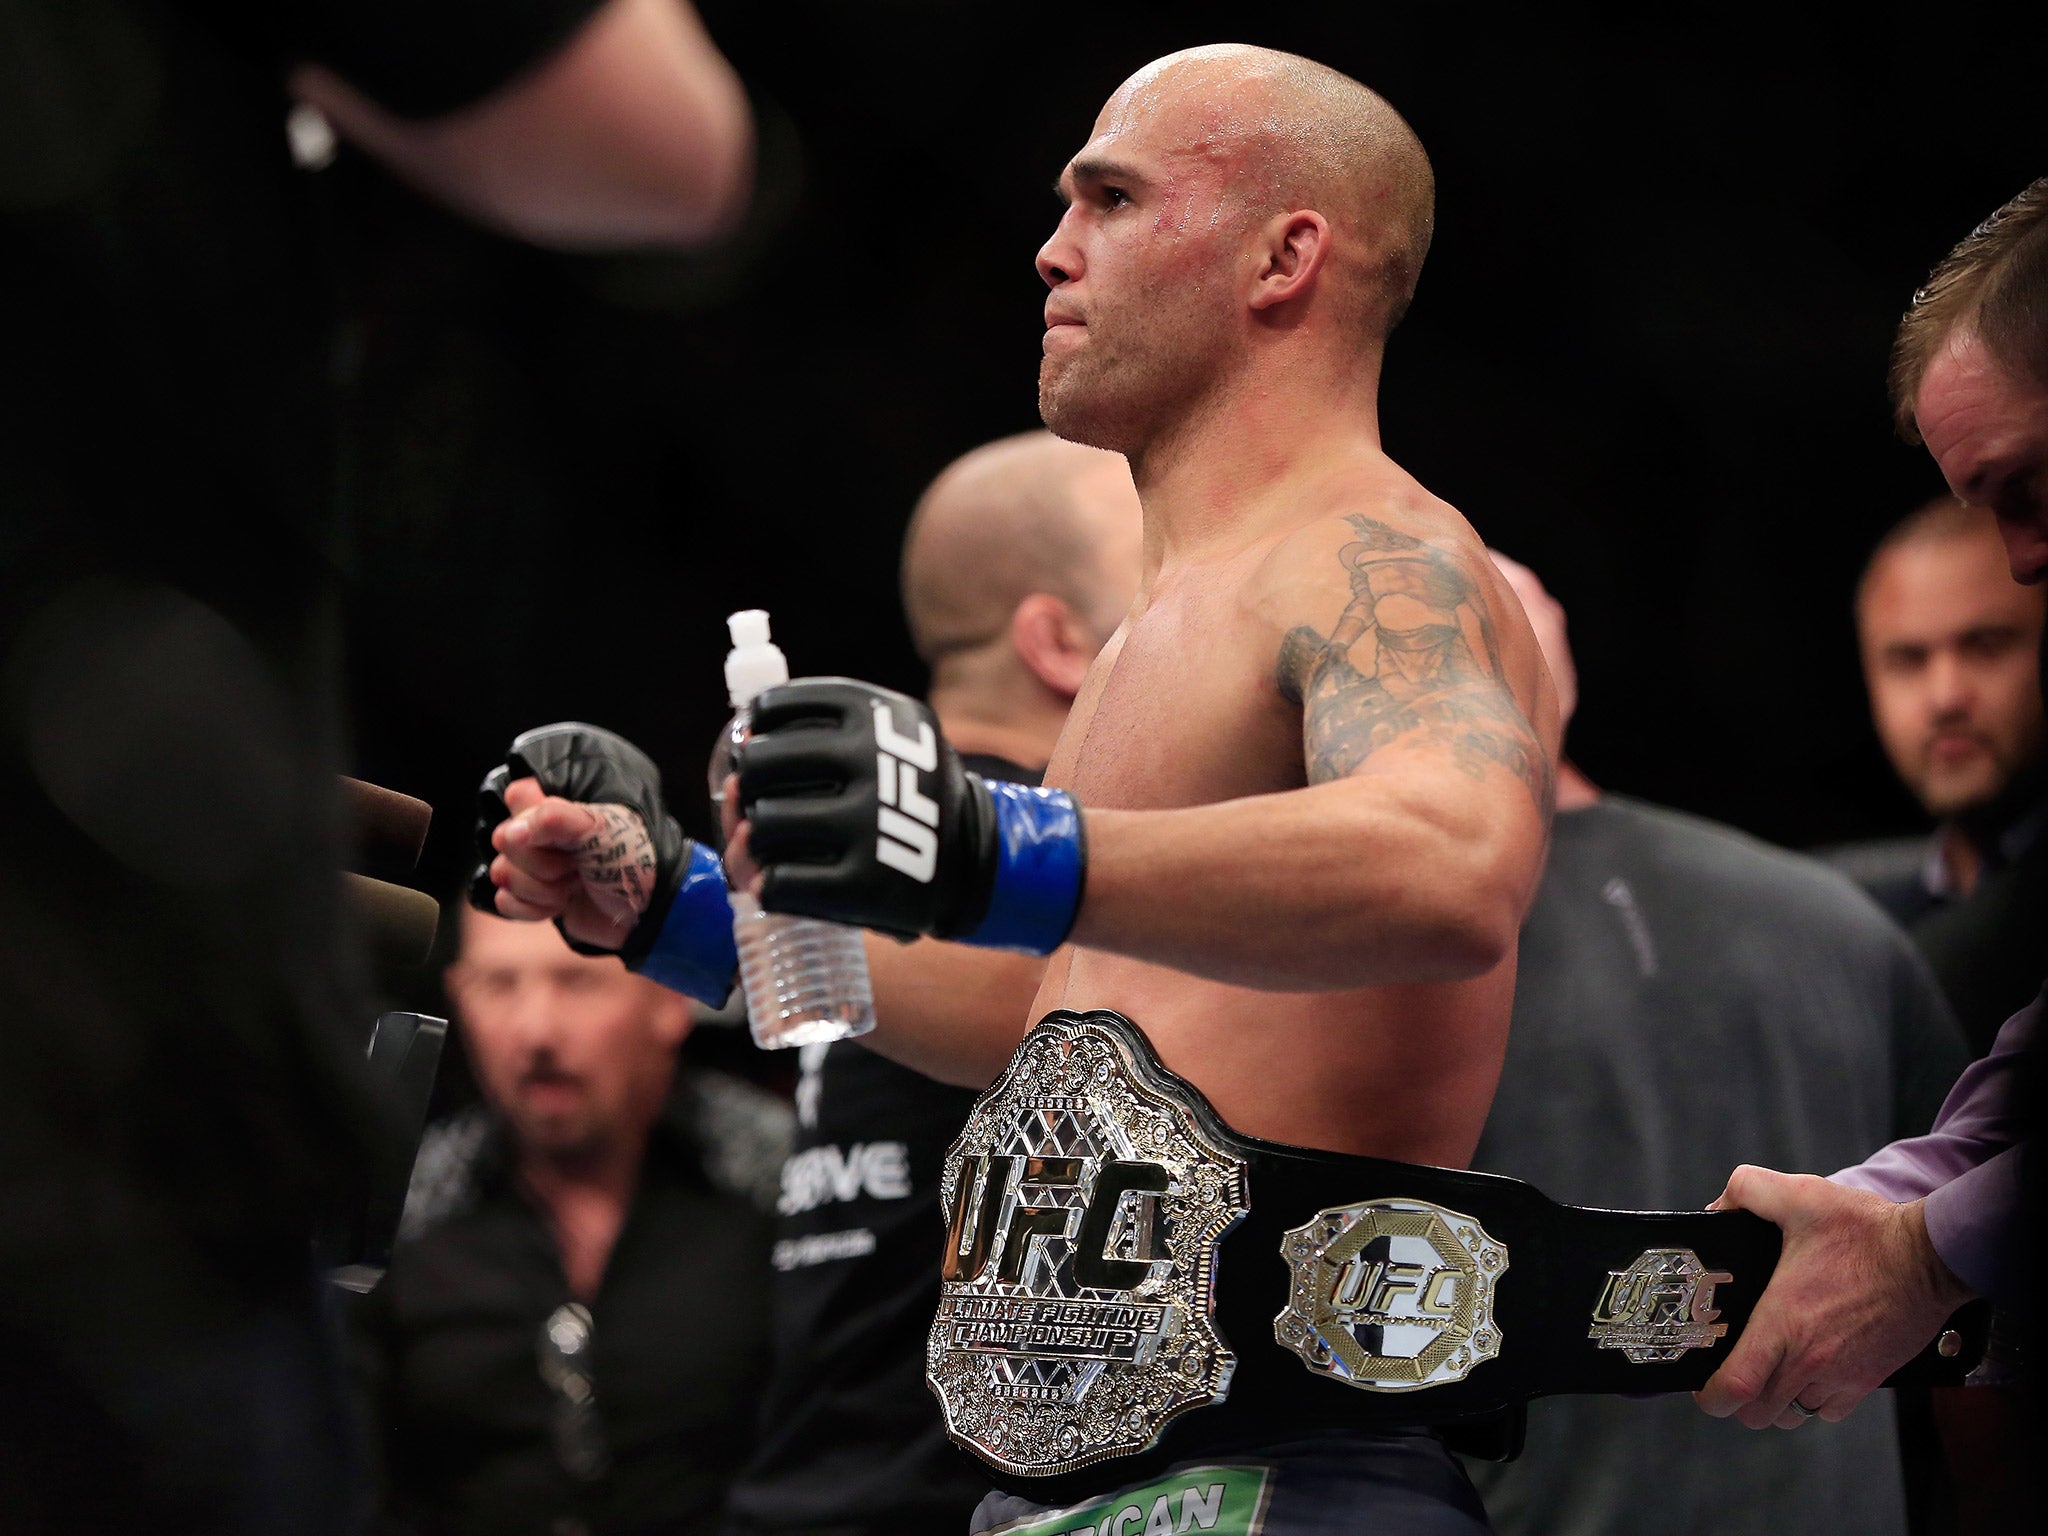 Robbie Lawler defends his UFC welterweight championship at UFC 201 against Tyron Woodley